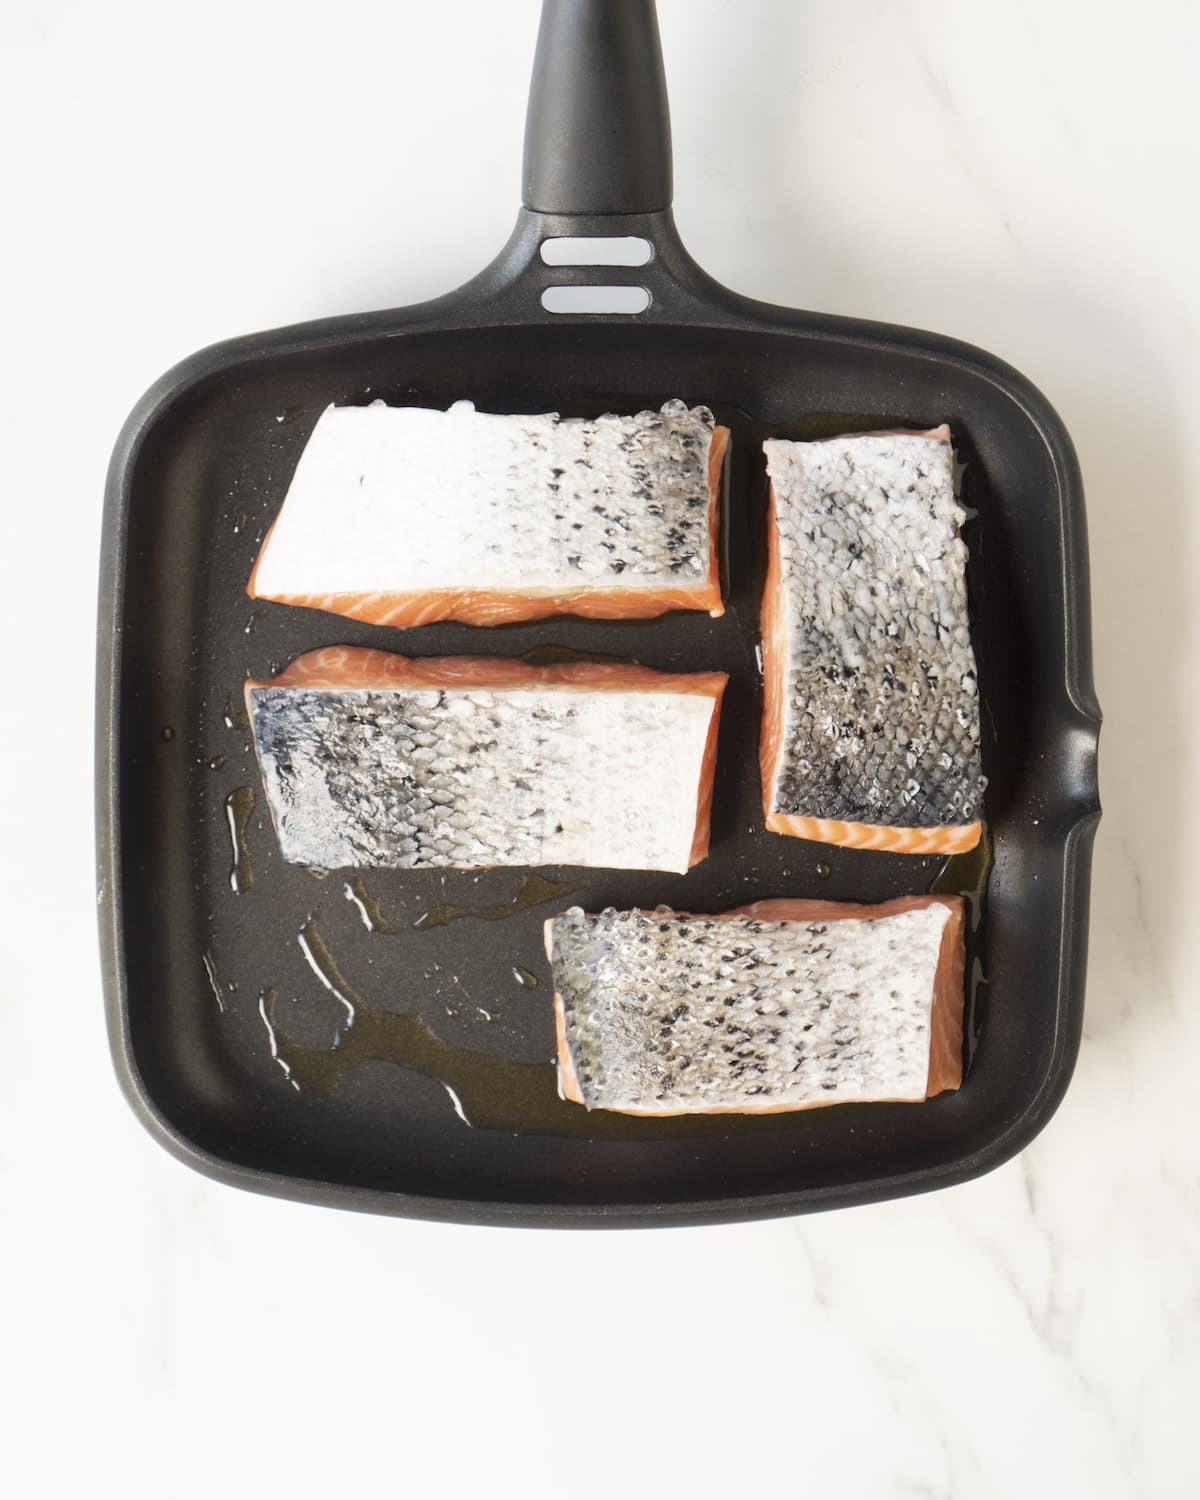 A pan layered with olive oil and salmon fillets cooking on a white marbled countertop. 